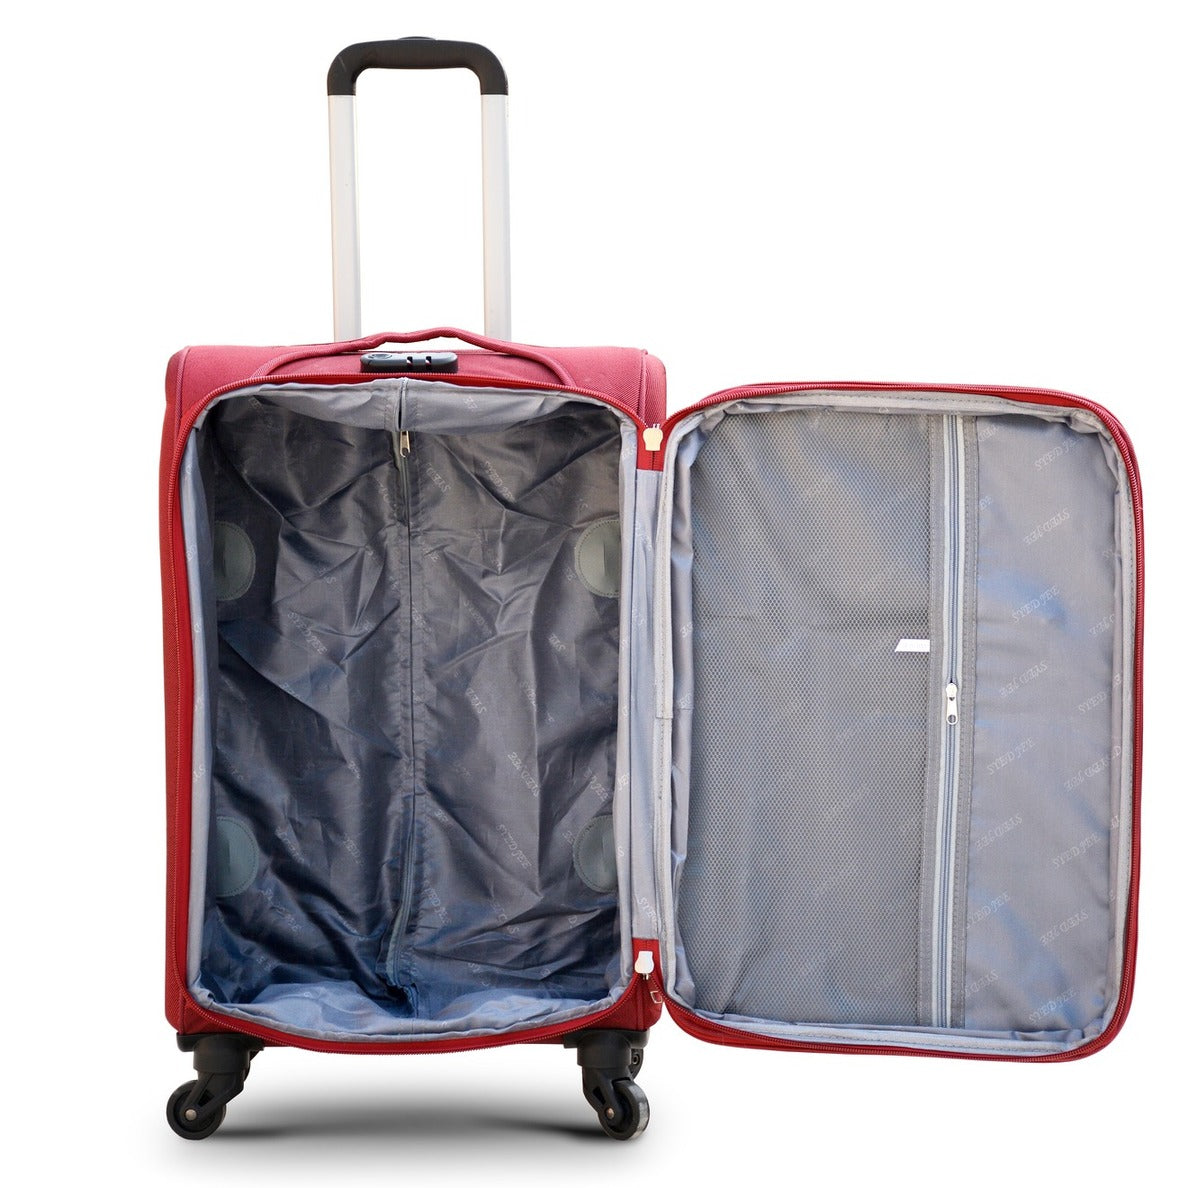 Carry On Lightweight 4 Wheel Soft Material Luggage Bag | 20 Inch Size 7-10 Kg Capacity